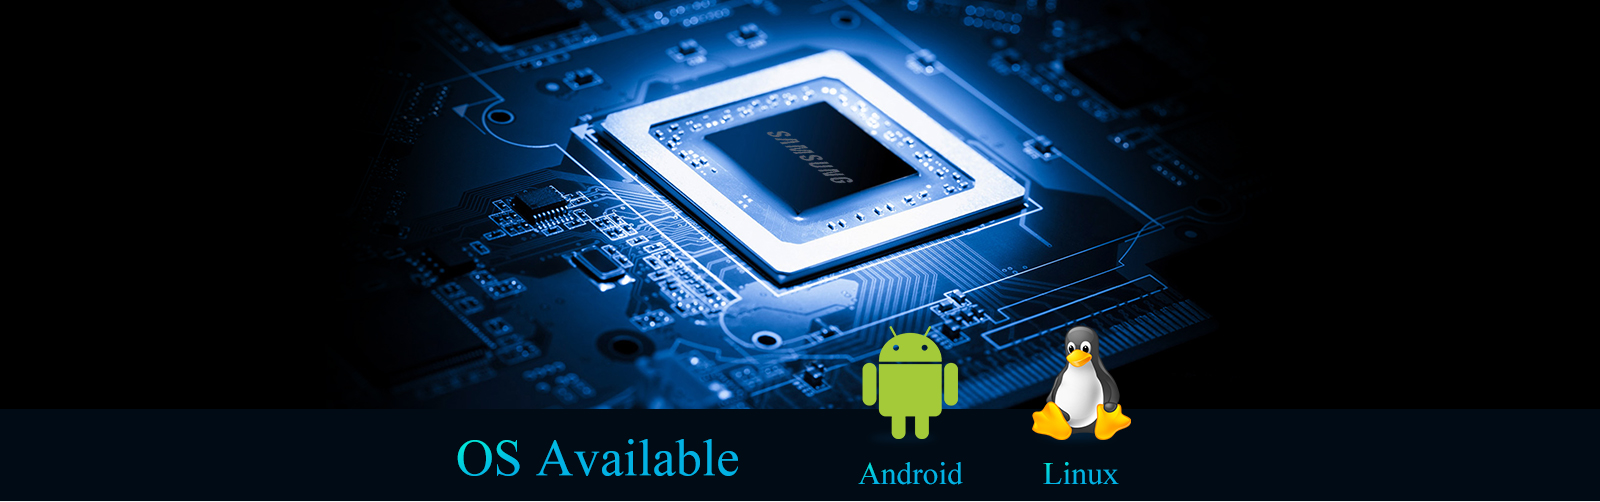 OS Android 5.1.1 and Linux 3.4.9